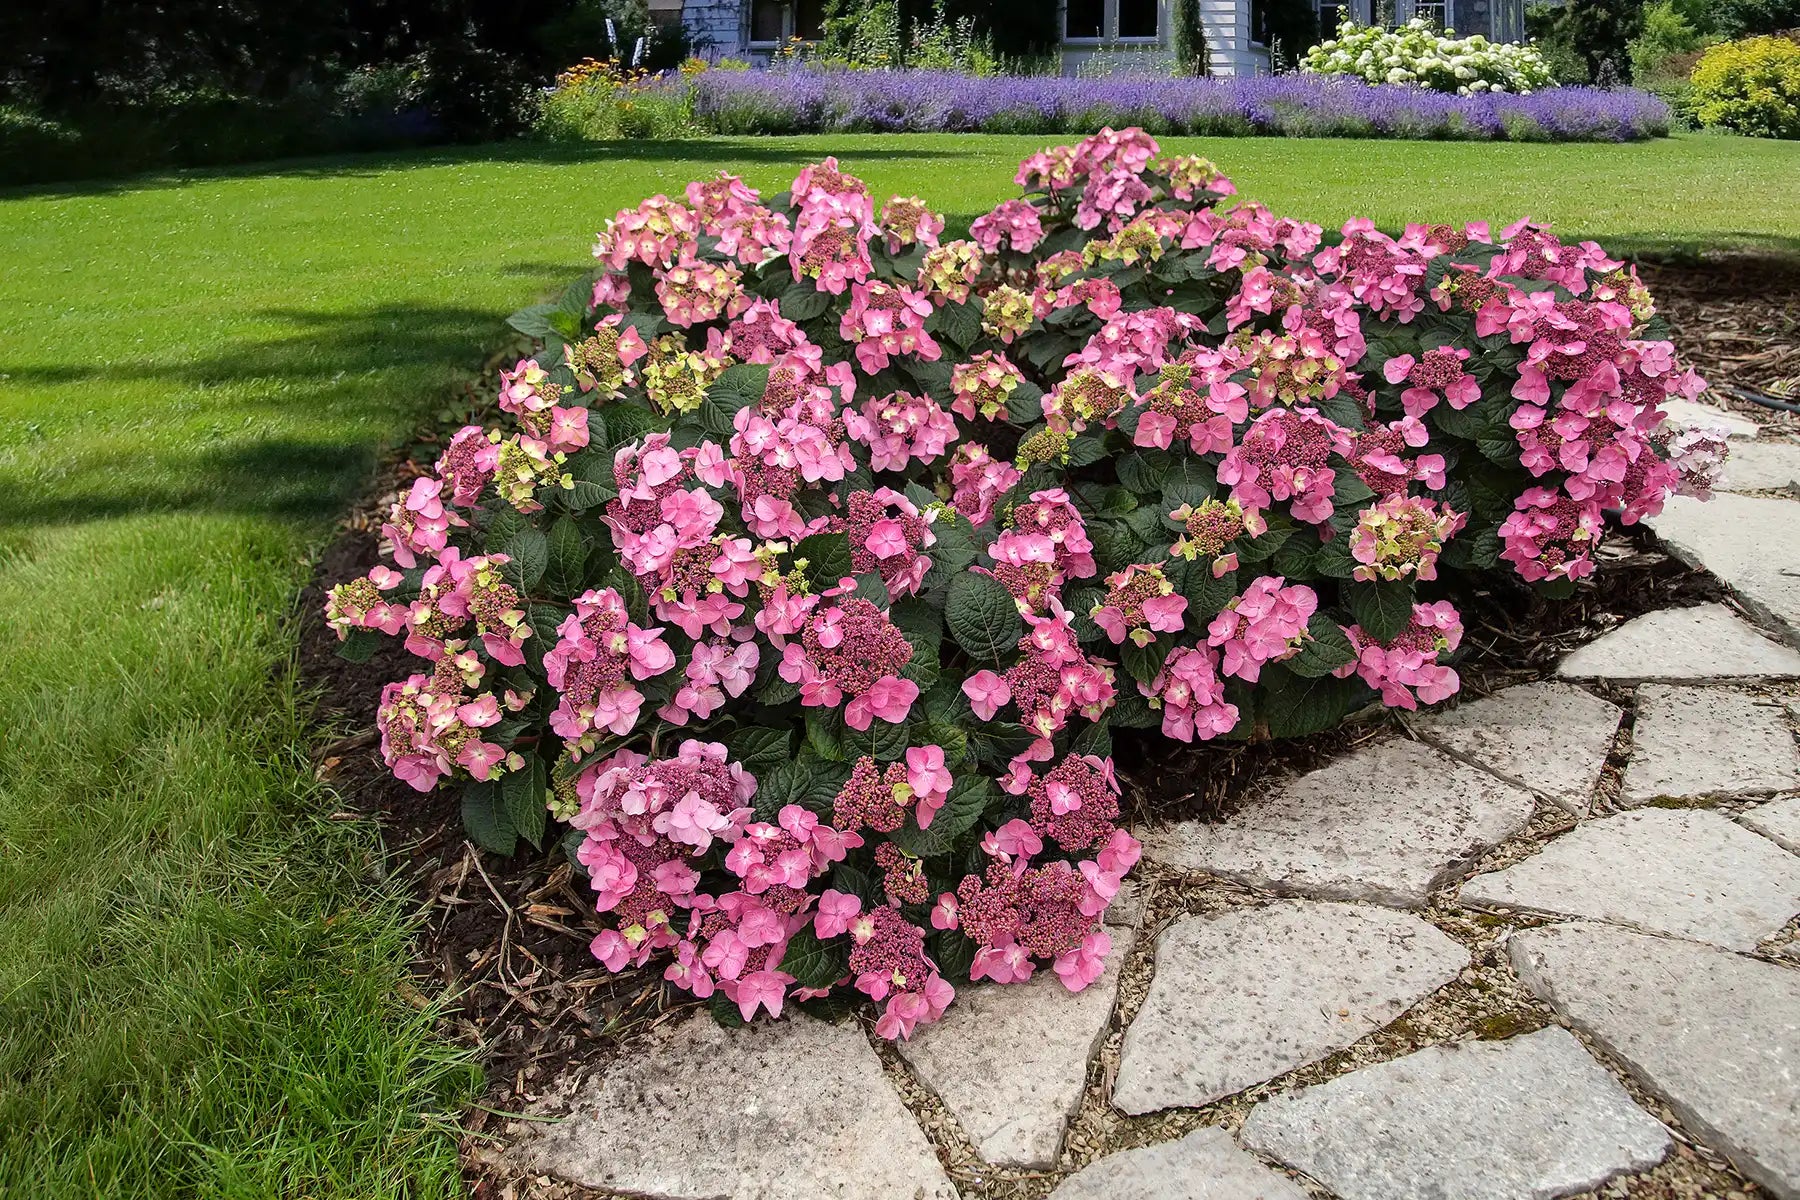 Pop Star® Hydrangea is famous for reblooming flowers and their hardy nature. An absoluter rock star wearing  pink  beside an irregular stone walkway surrounded by  a lush lawn.